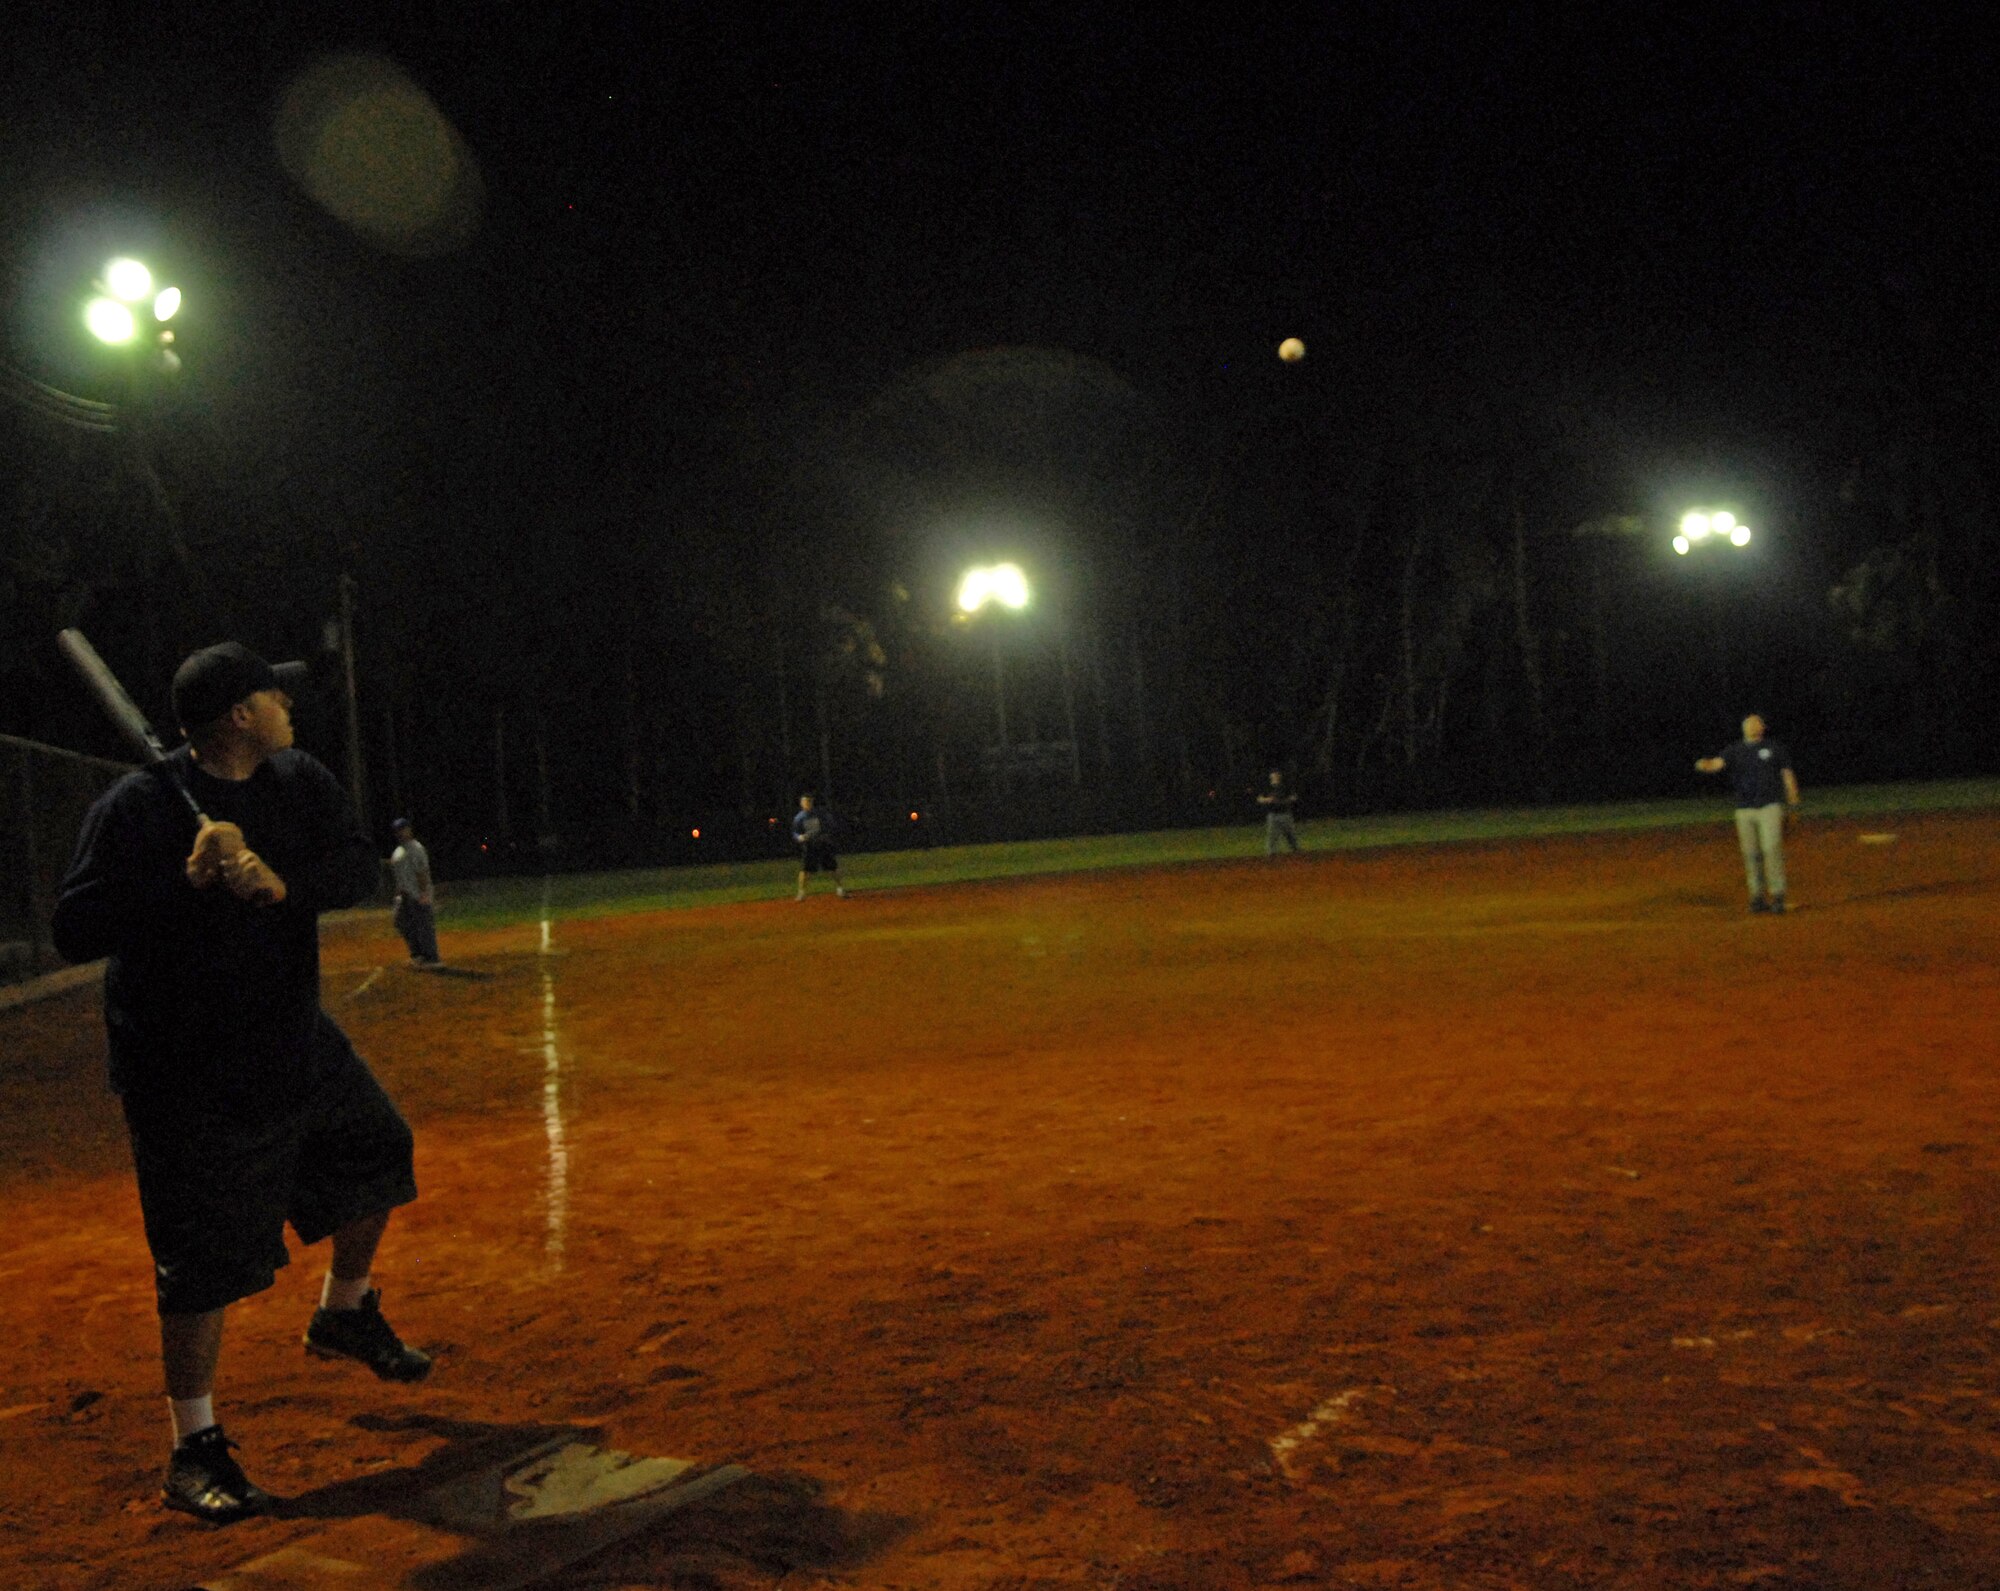 VANDENBERG AIR FORCE BASE, Calif. -- Let the games begin! Members of the 30th Space Communications Squadron play against the Army Prison Guards during a winter intramural softball practice game here Tuesday, Feb. 16, 2010. There are a total of 13 teams competing this season. (U.S. Air Force photo/Airman 1st Class Kerelin Molina)
